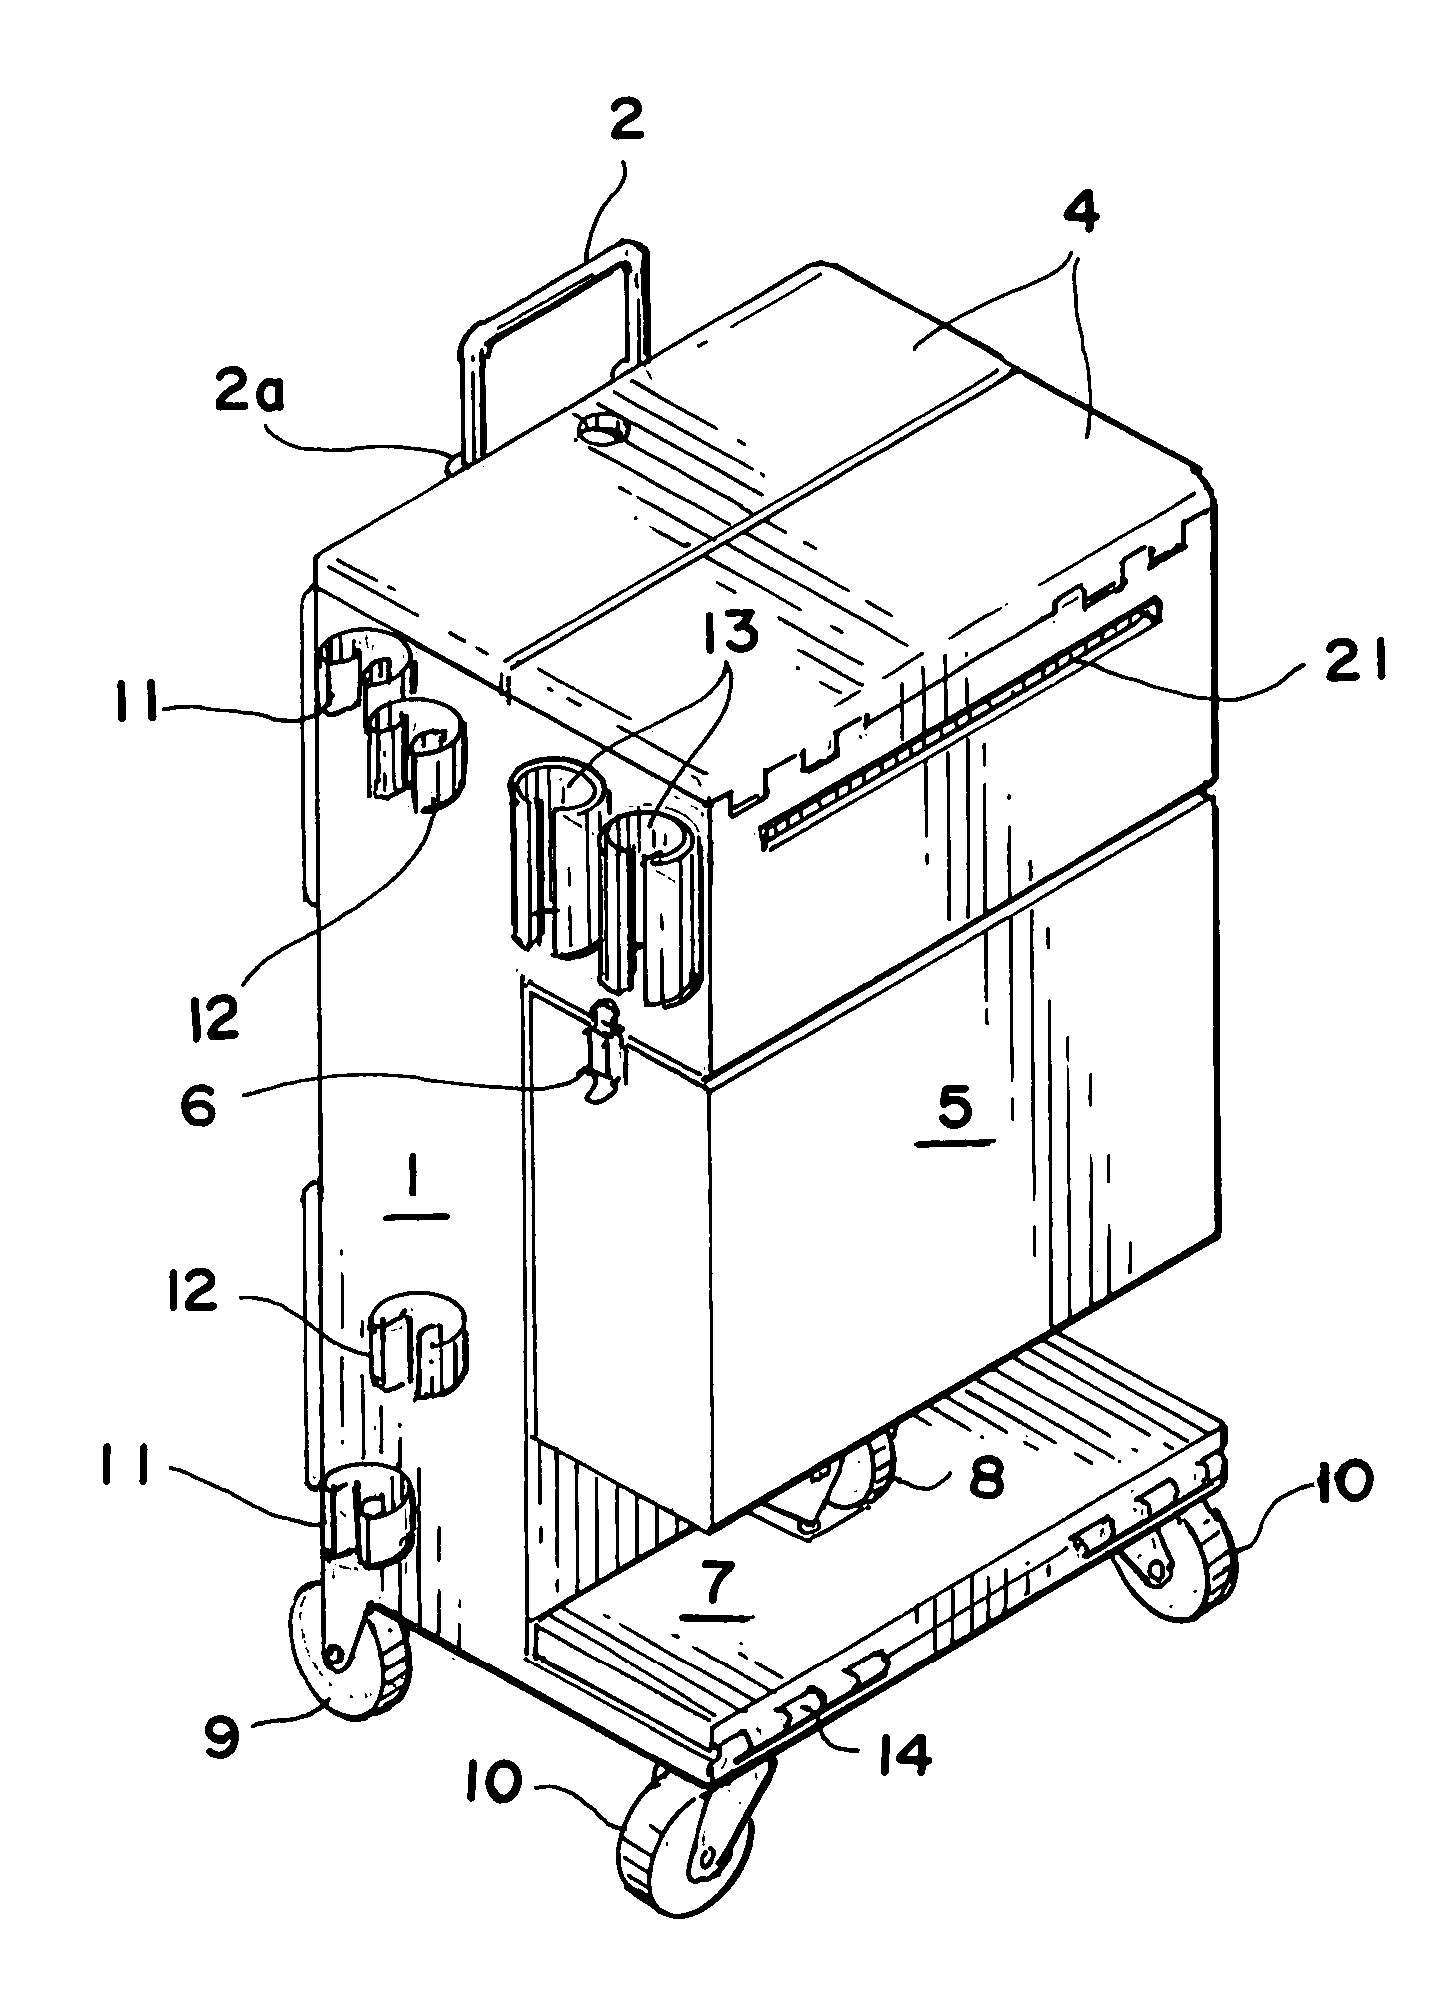 Self-contained utility cart